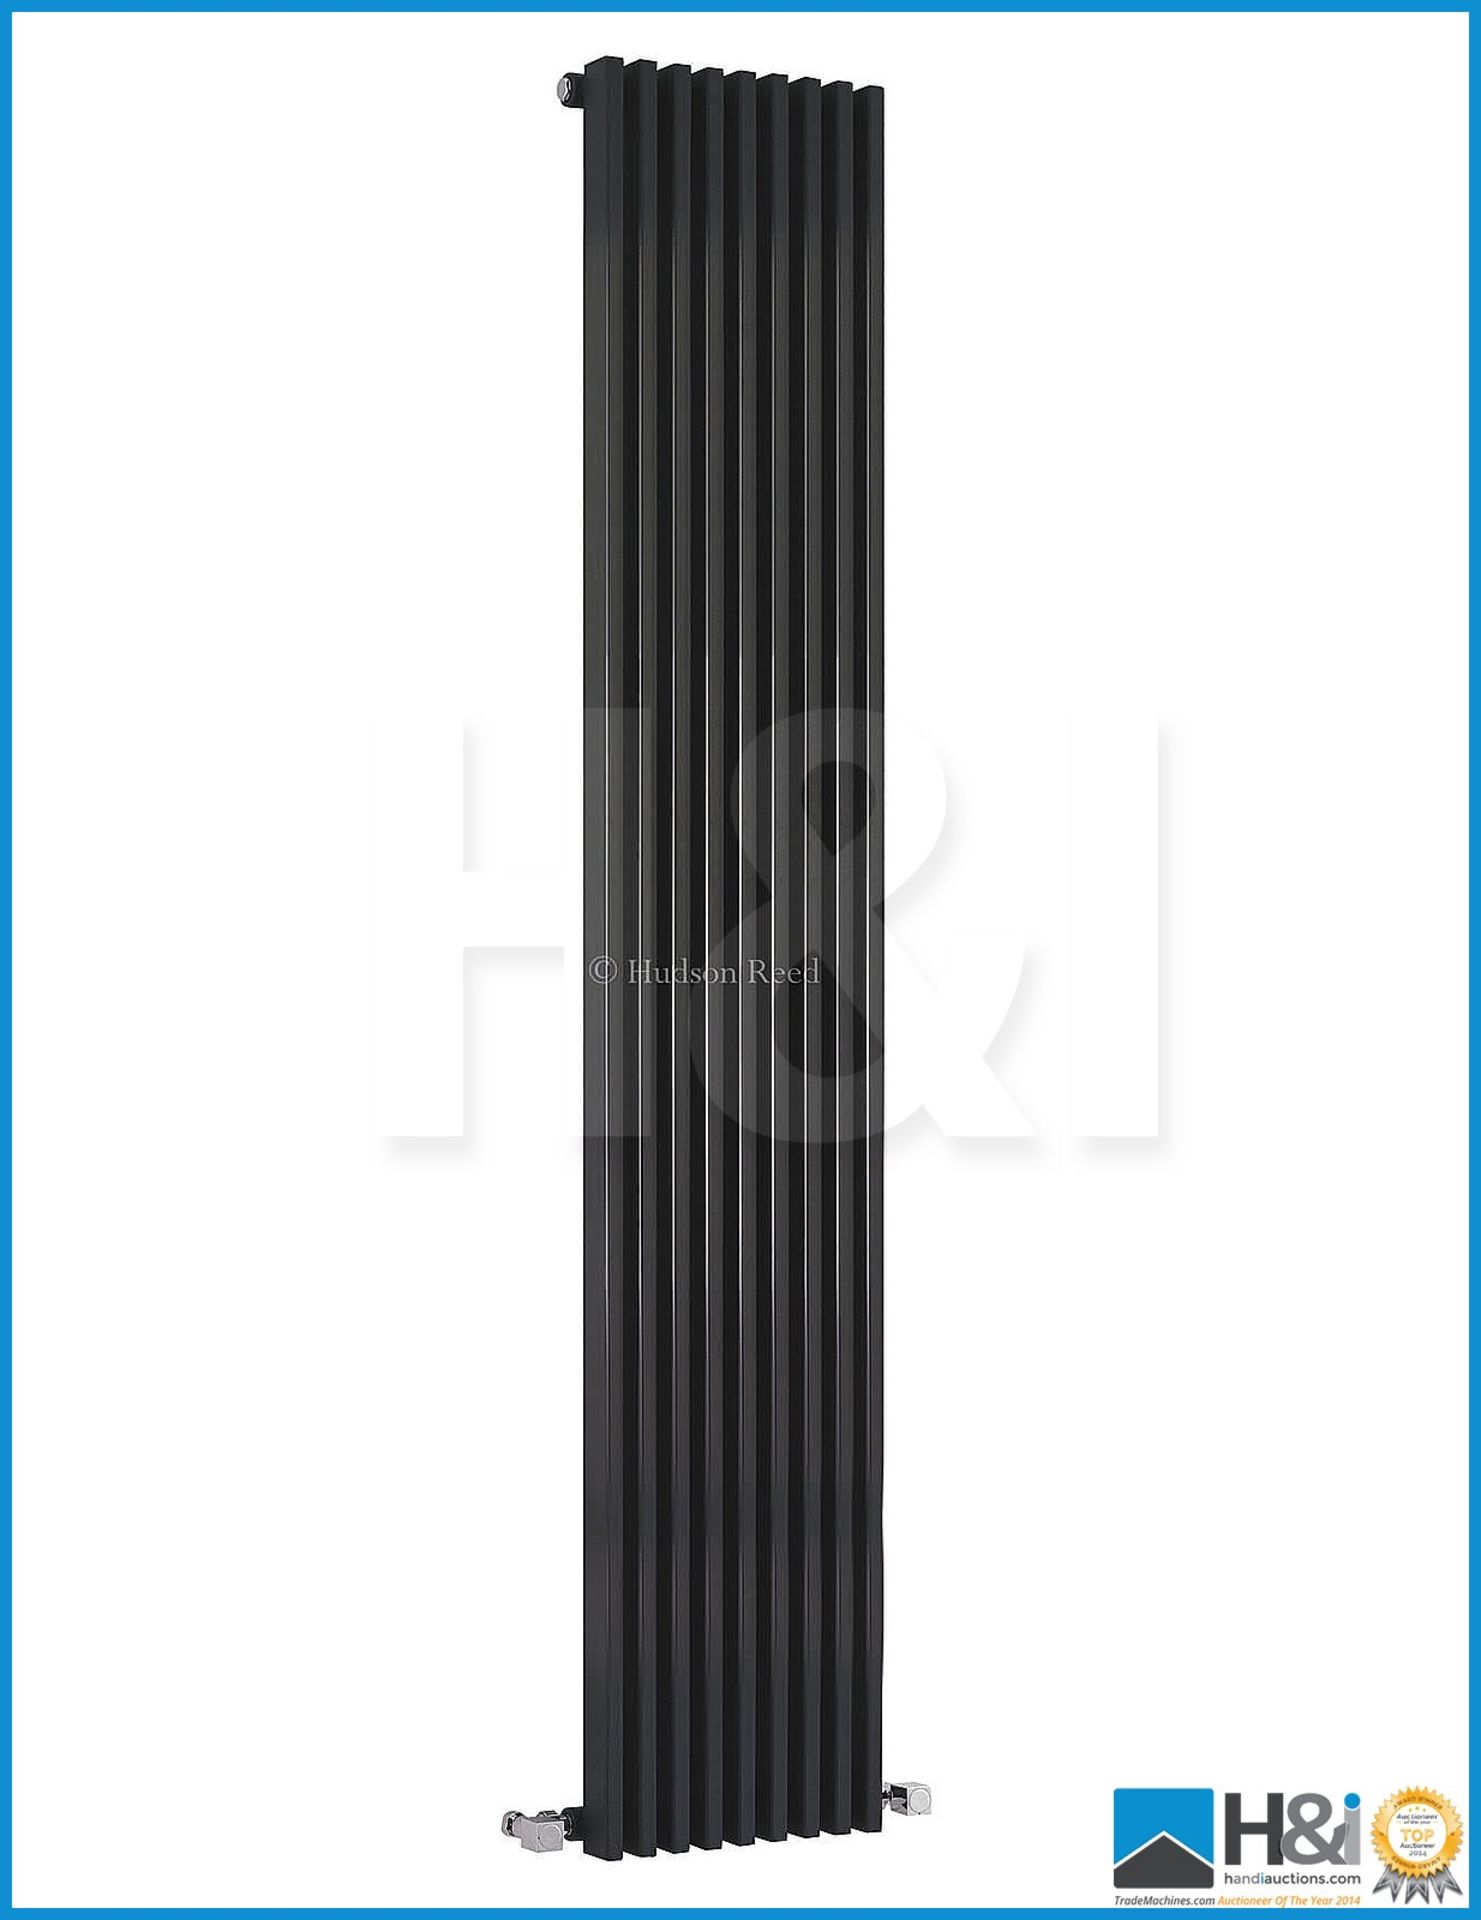 Hudson Reed HLB90 Parallel radiator in gloss black 1800x300 .New and boxed. Suggested Manufacturers